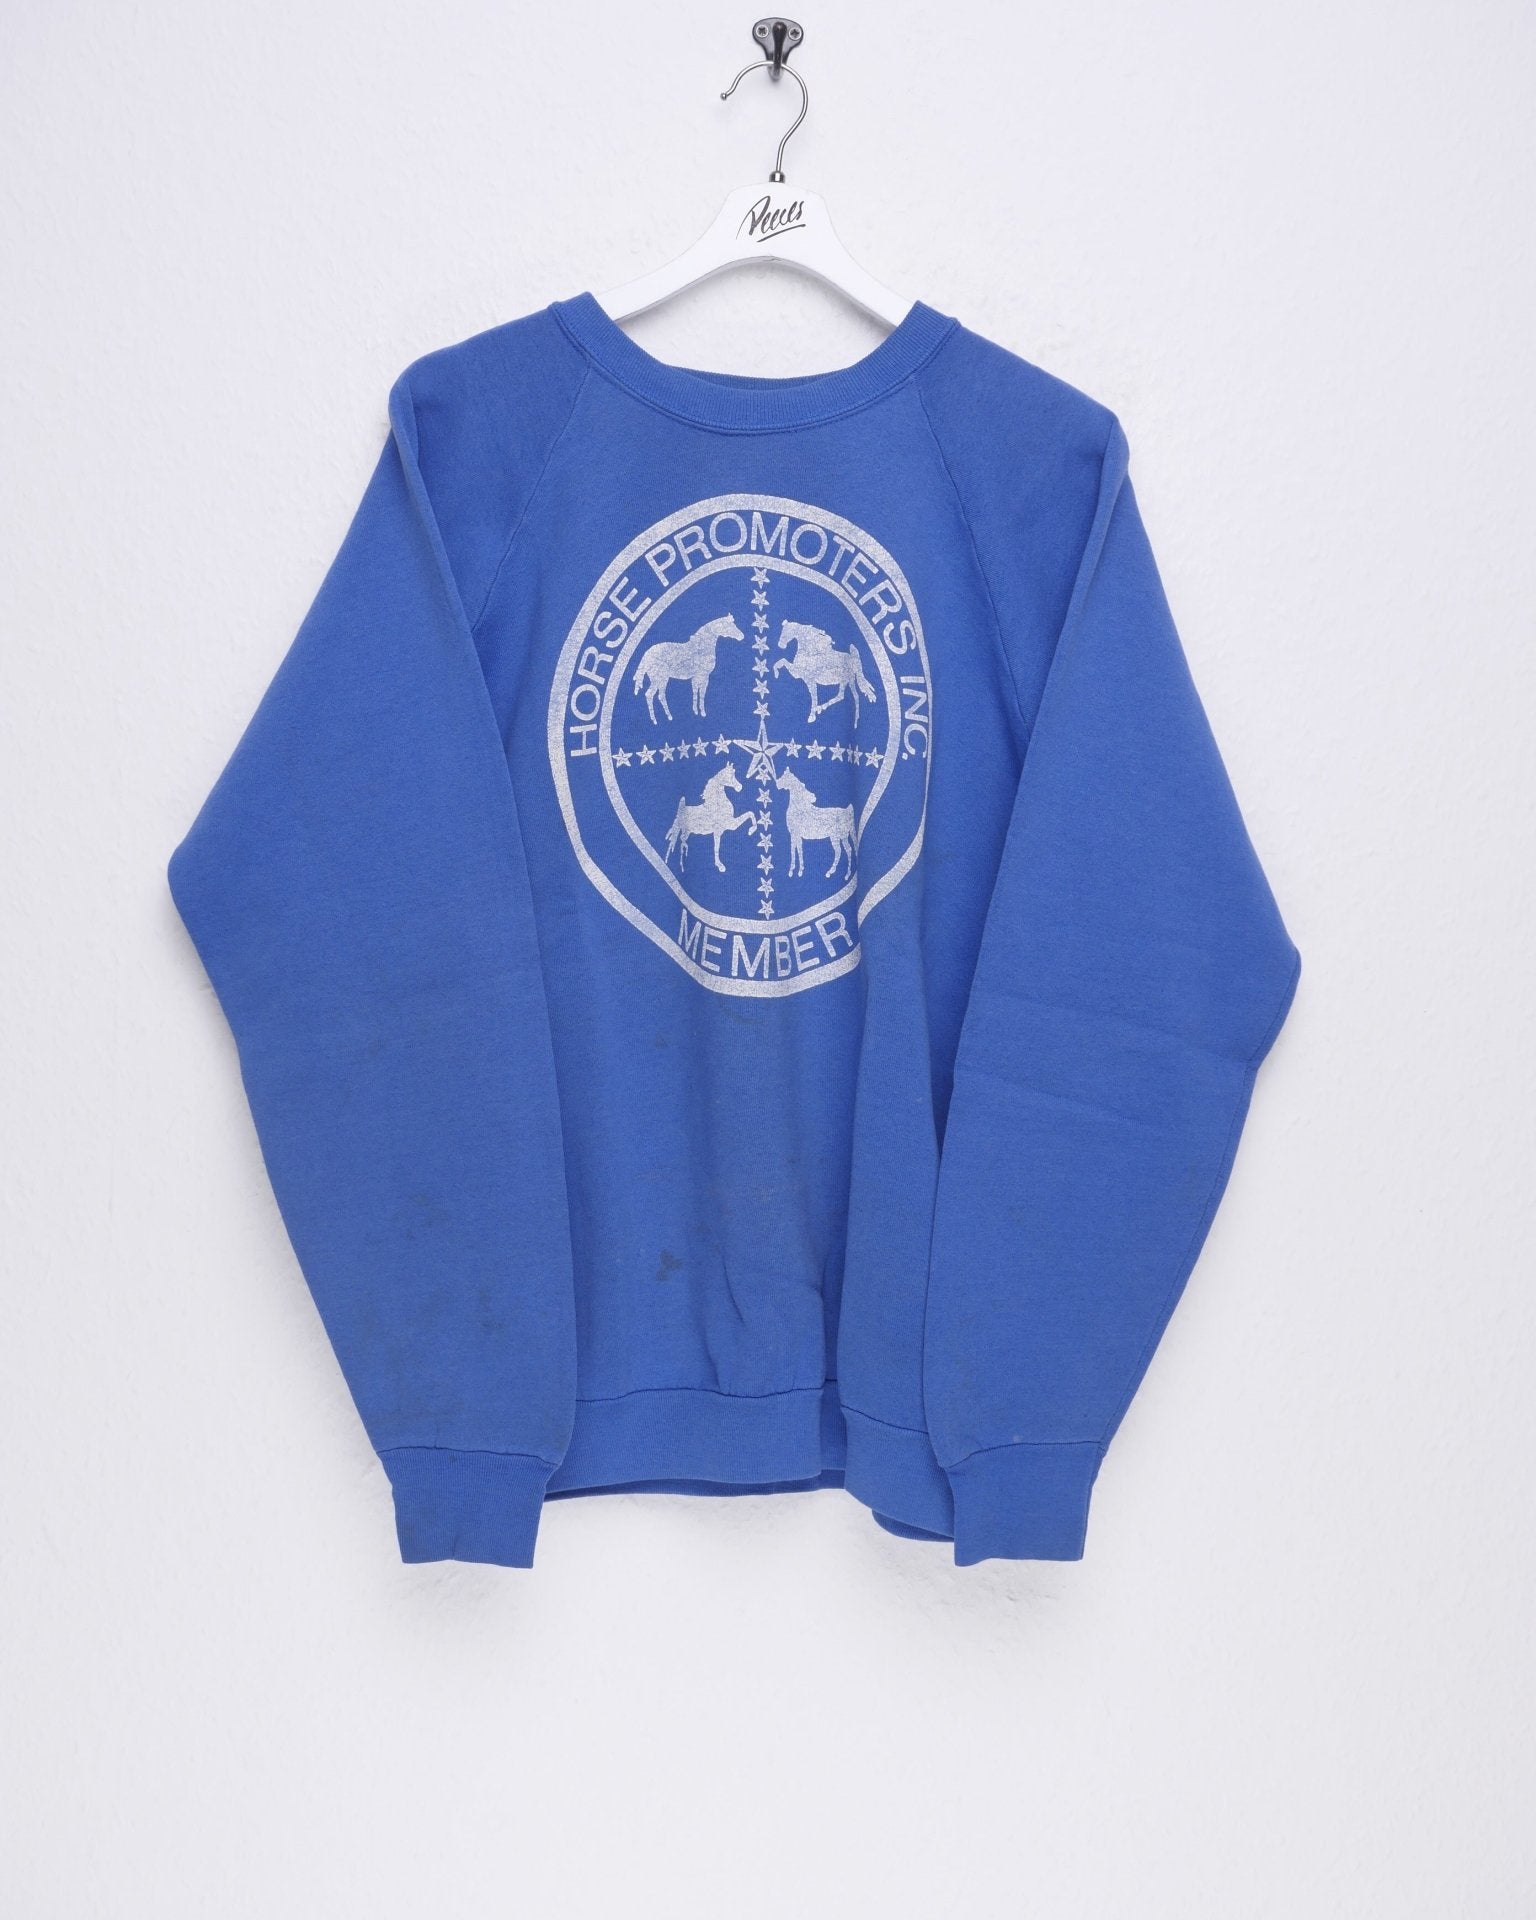 printed horse promoters member blue Sweater - Peeces